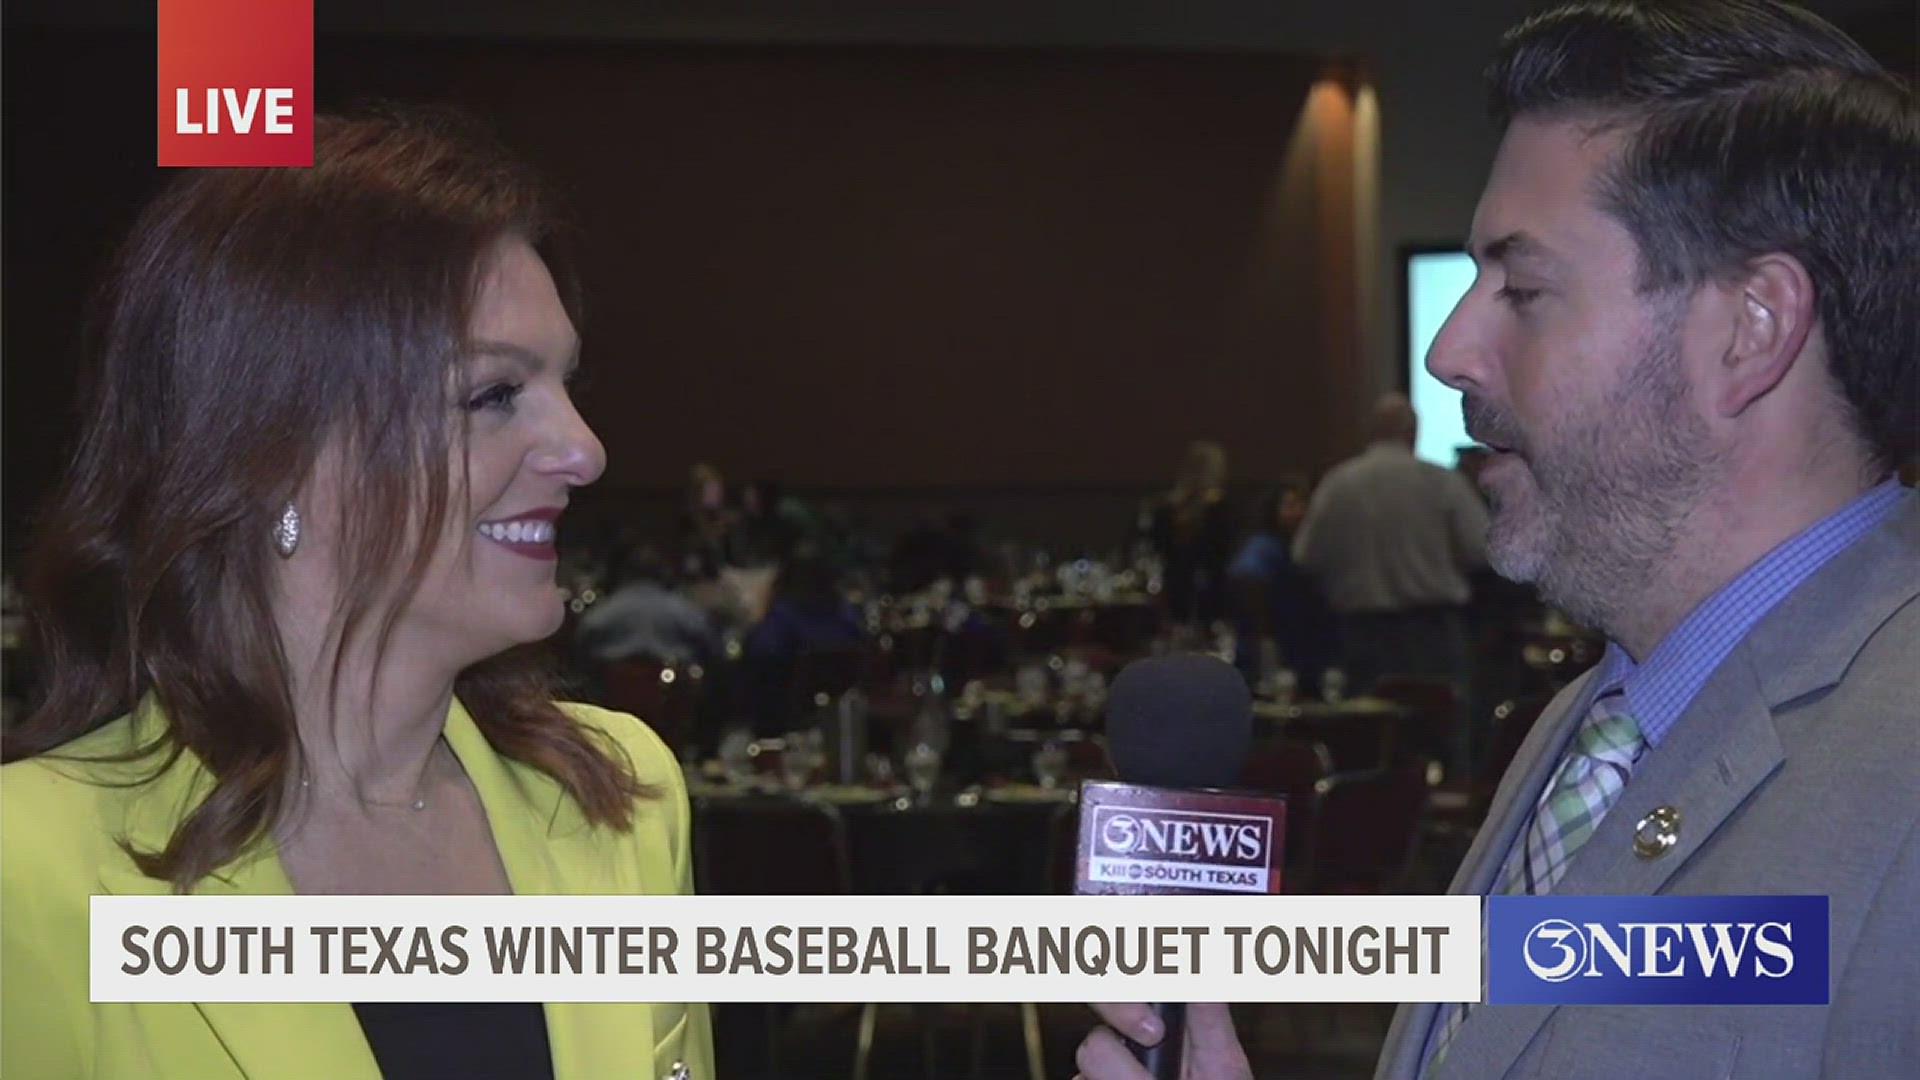 Astros field reporter Julia Morales spoke with Chris Thomasson about being the featured speaker at the South Texas Winter Baseball Banquet.